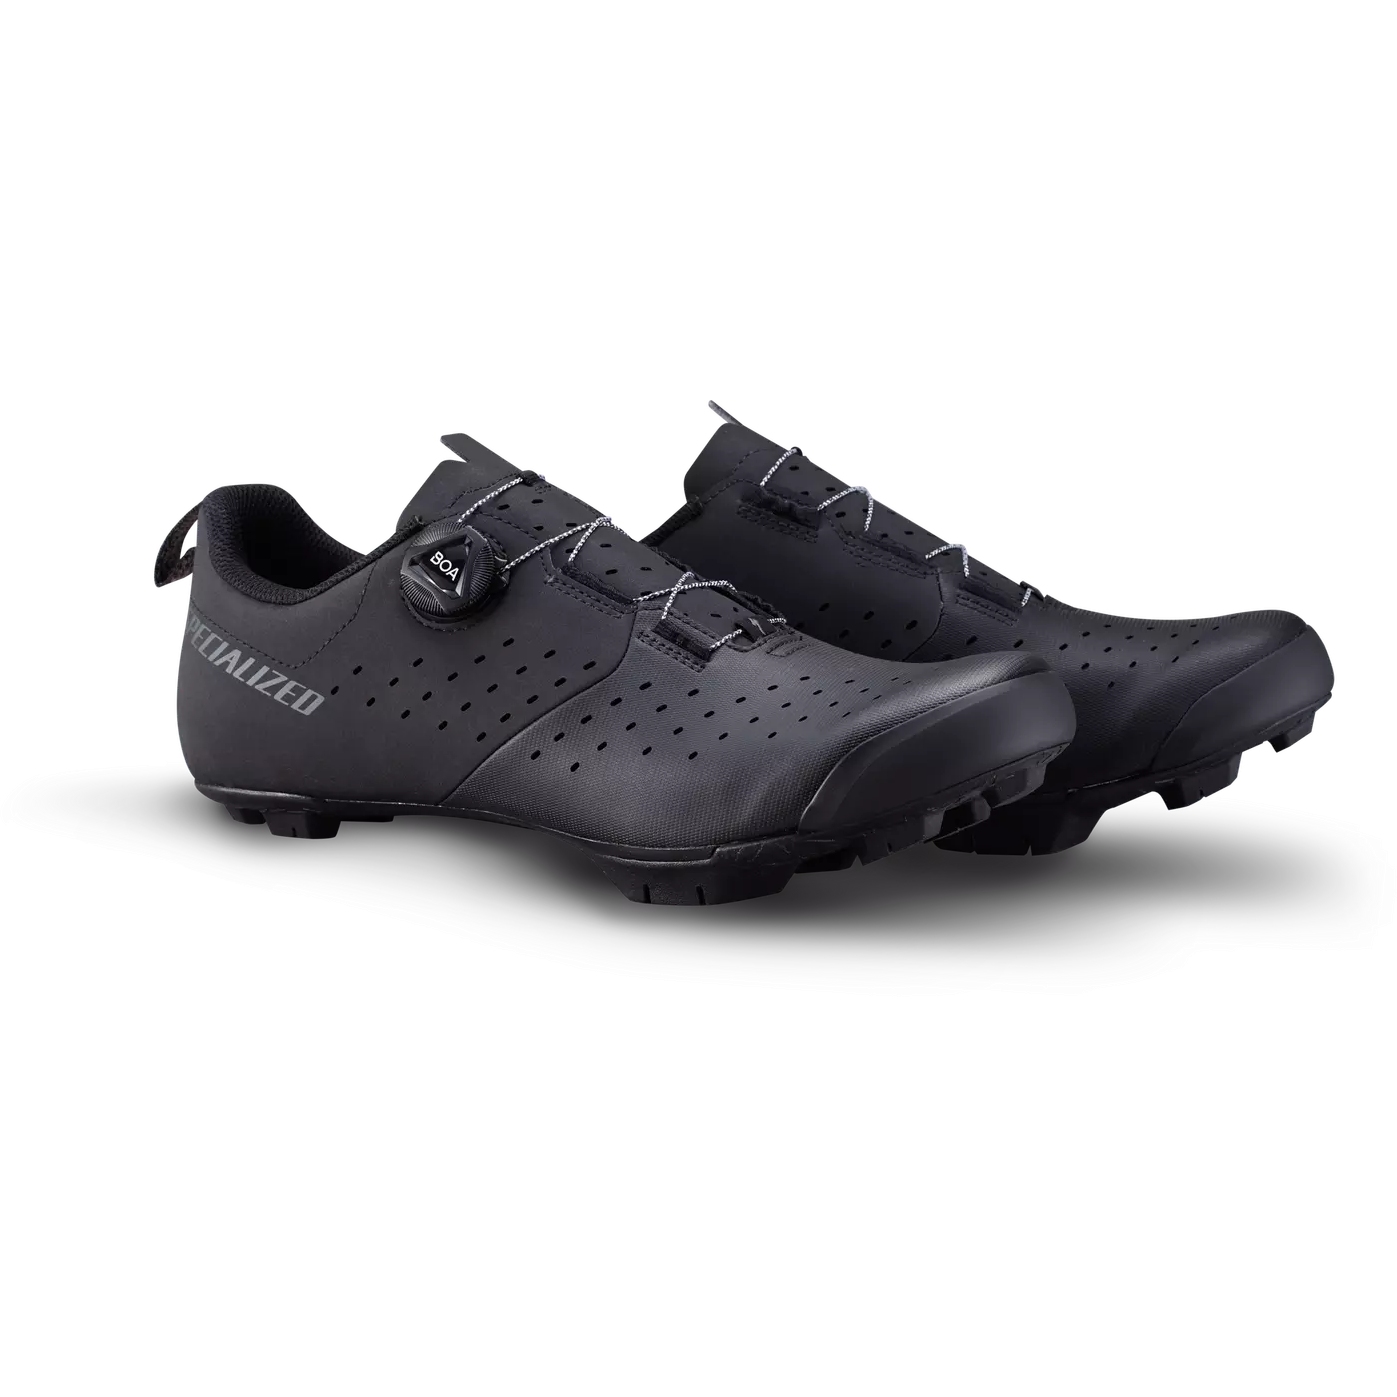 Picture of Specialized Recon 1.0 Gravel Shoes - Black